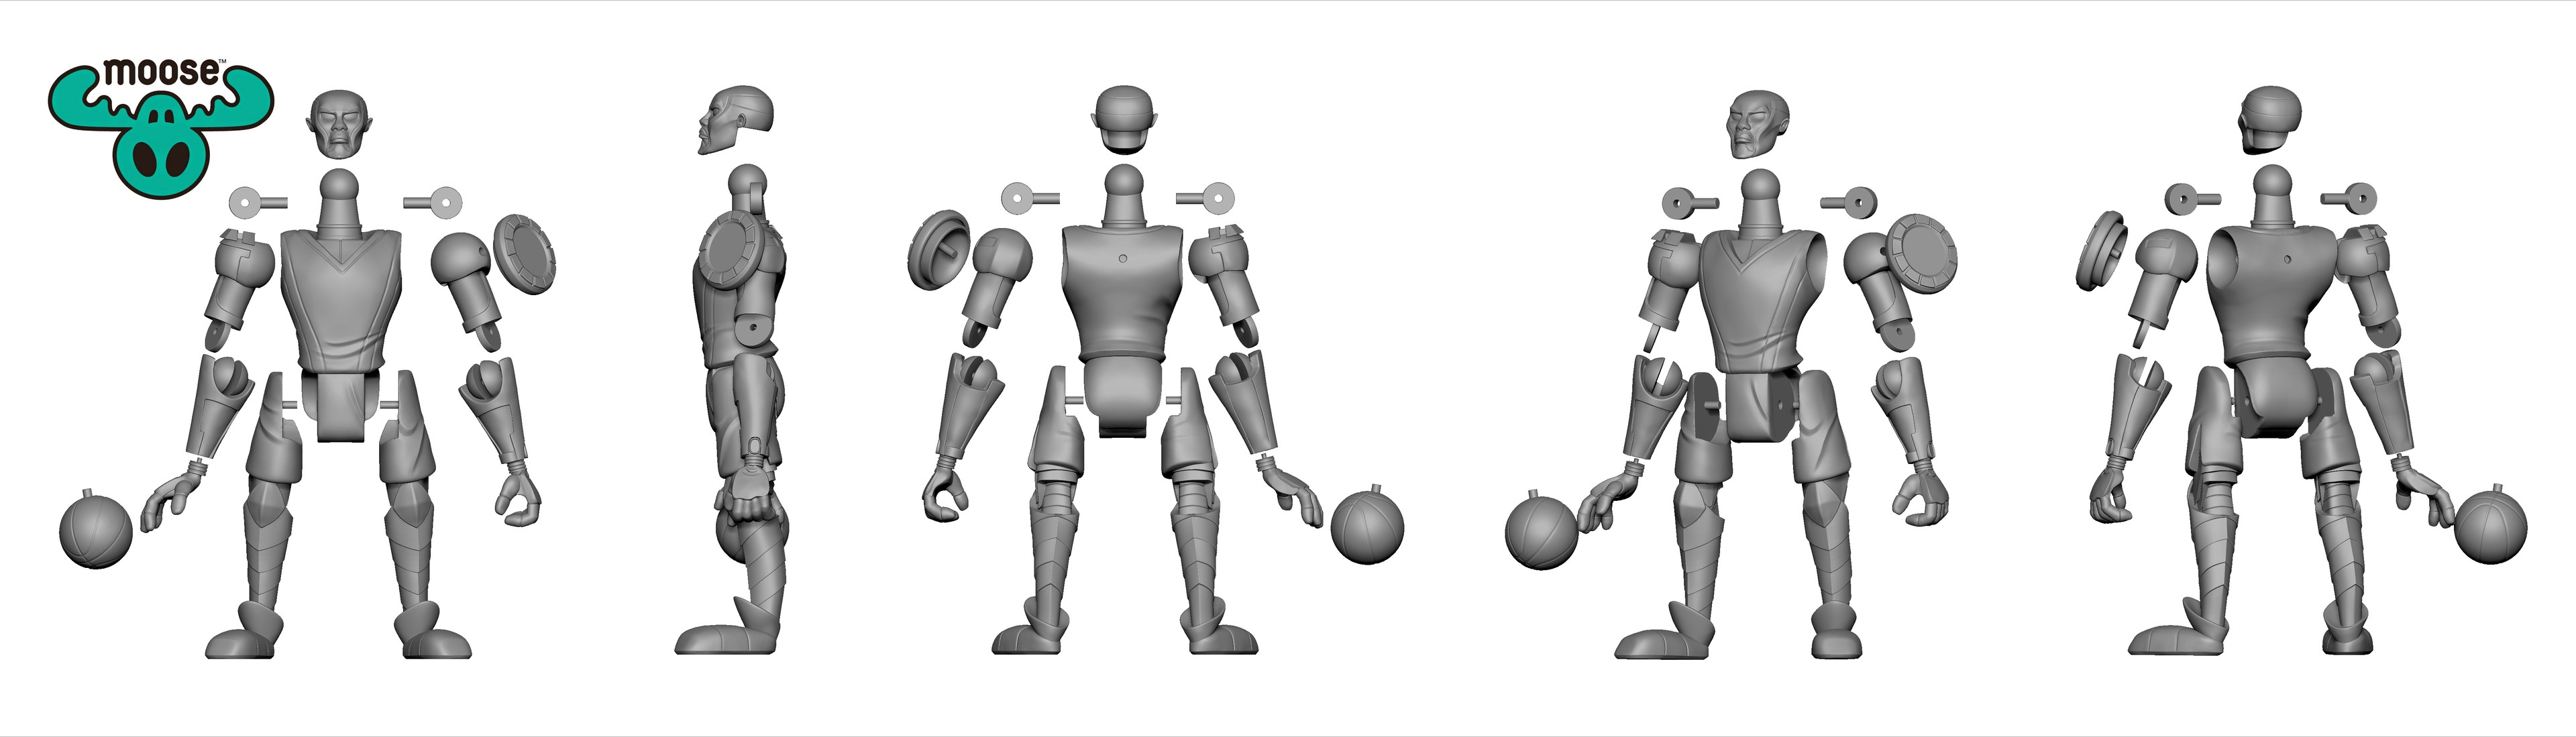 Articulation for Chronos. Includes ball joint neck, ball joint shoulders with hidden disk, right flatplane wrist ball joint elbows, and flatplane legs.  